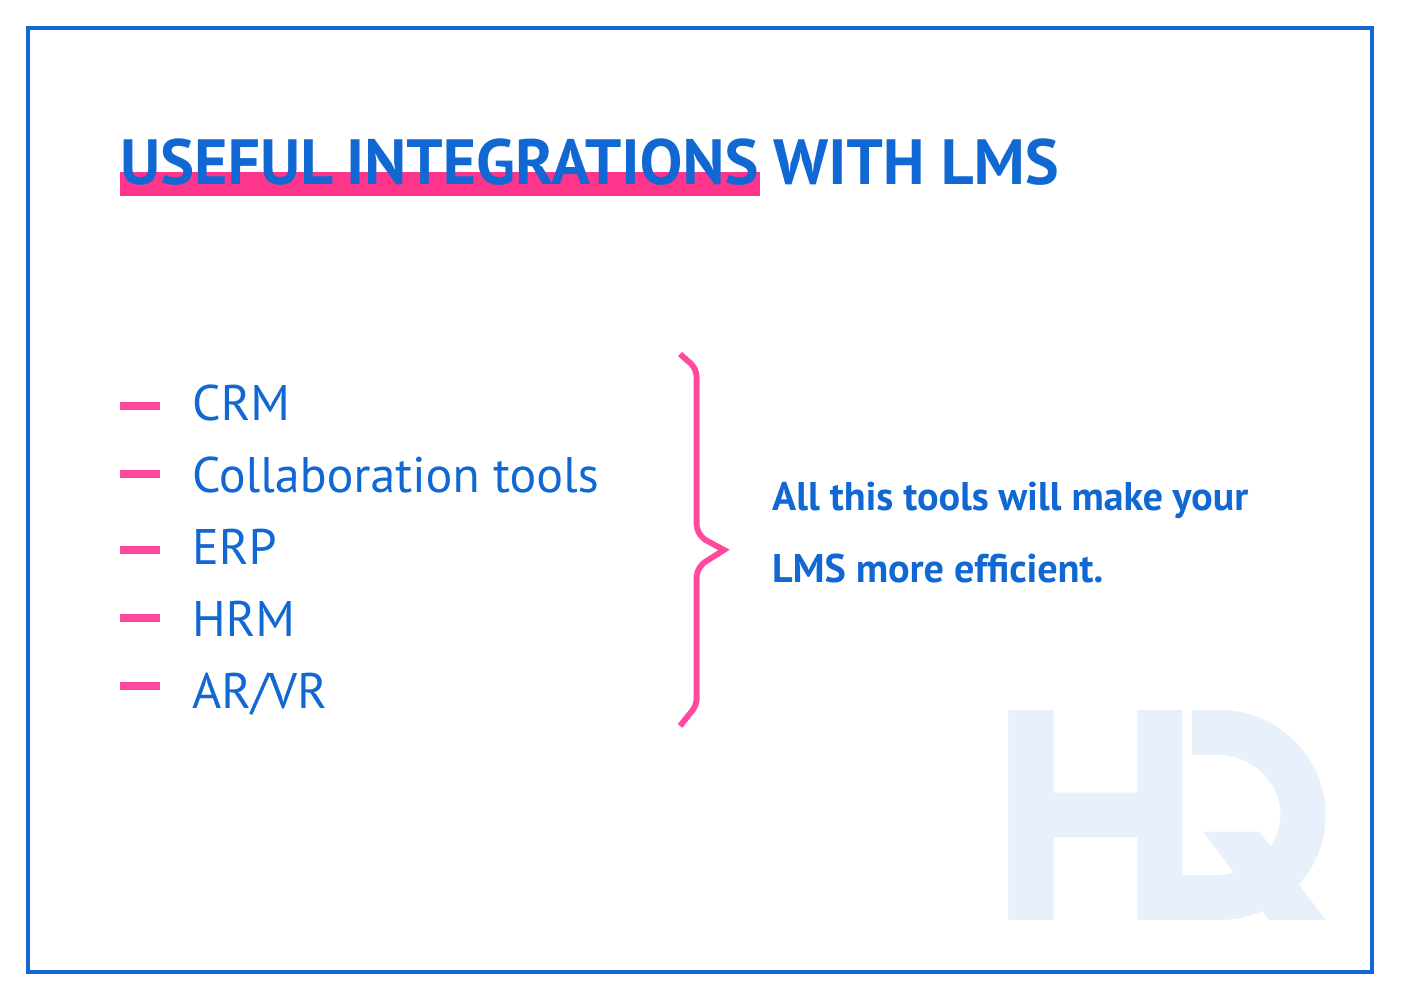 Useful integrations with LMS